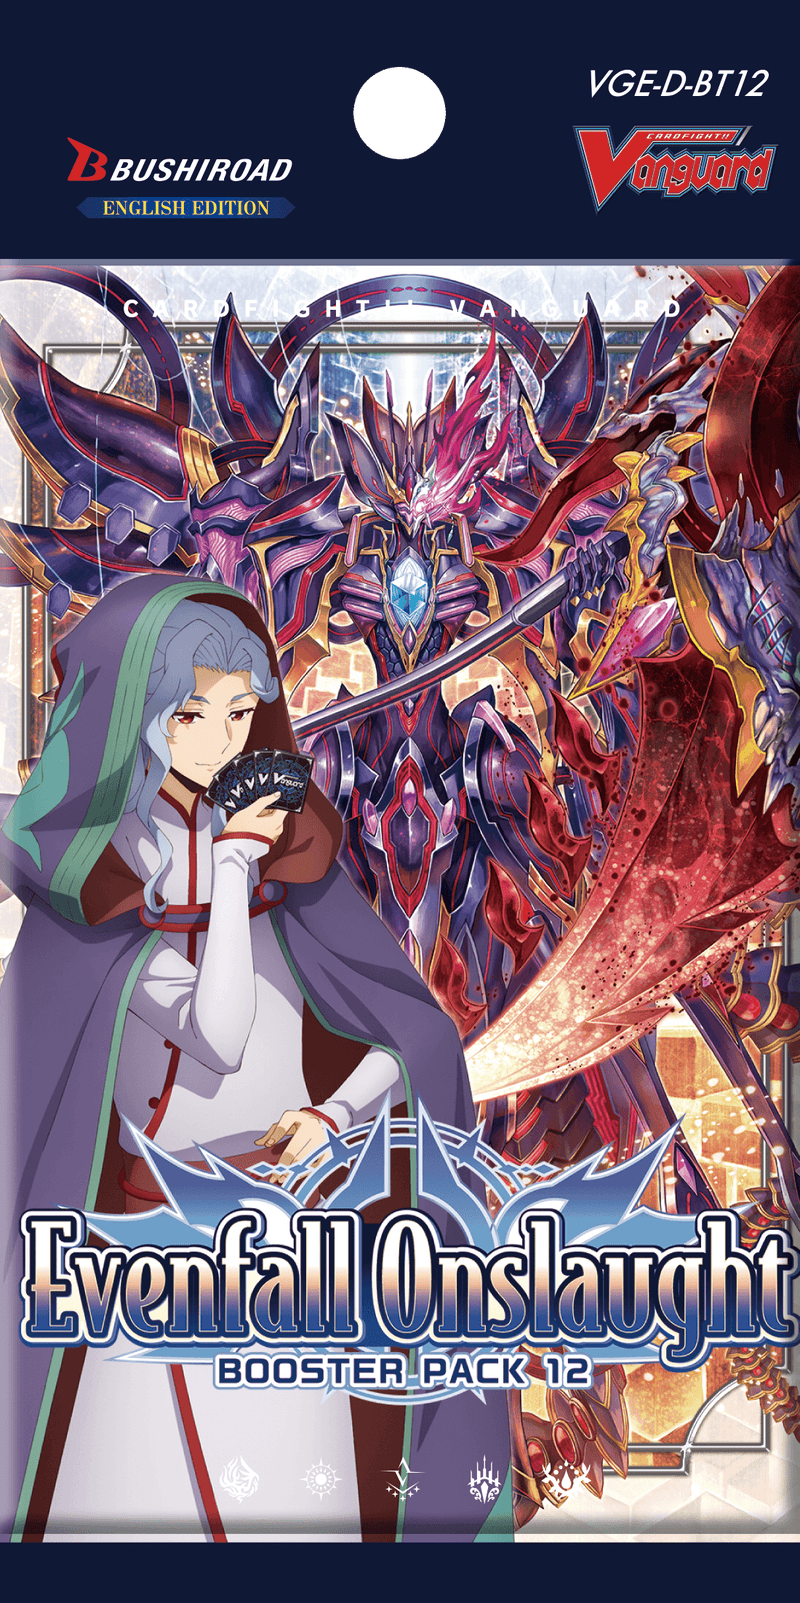 Cardfight Vanguard: Evenfall Onslaught Booster Pack 12 - Gamescape